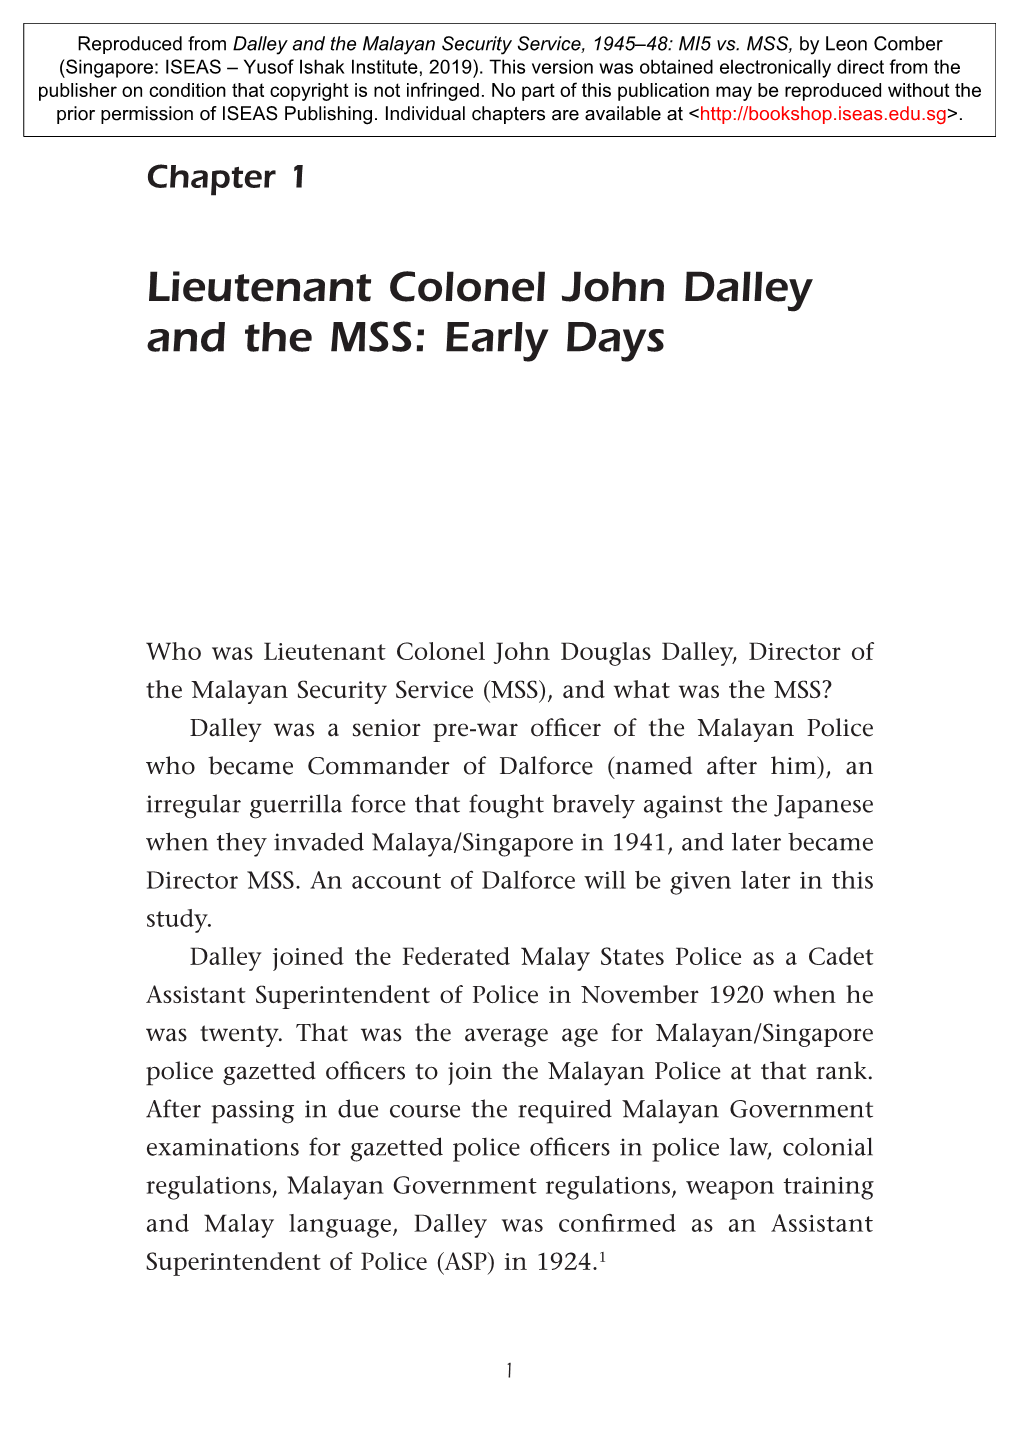 Lieutenant Colonel John Dalley and the MSS: Early Days